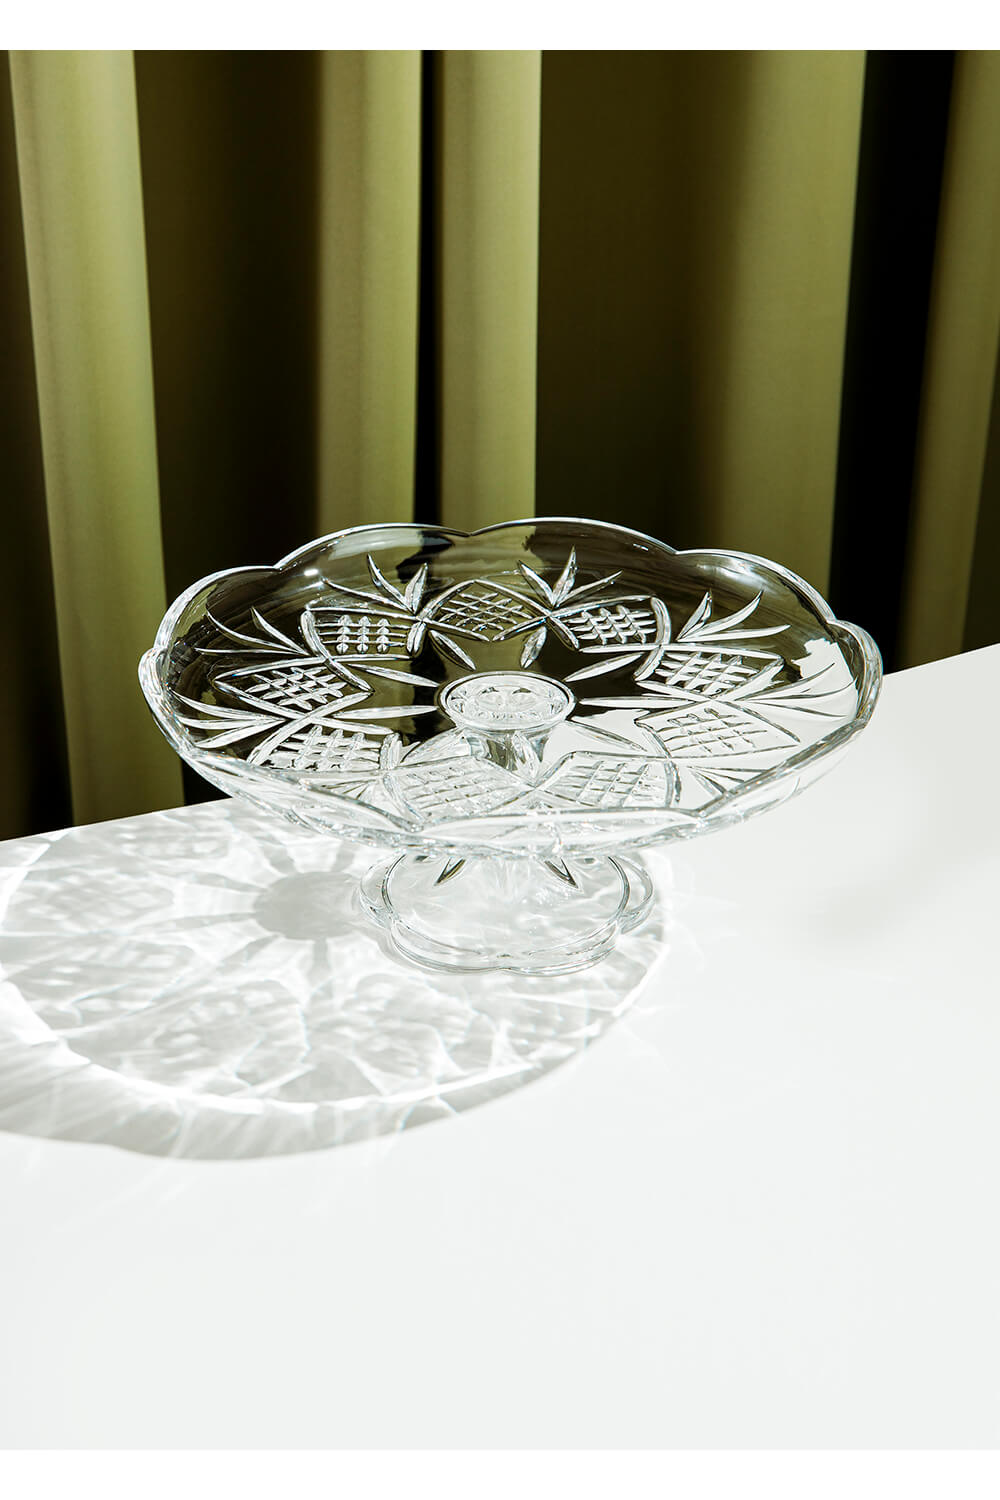 Killarney Crystal Trinity Footed Plate 5 Shaws Department Stores